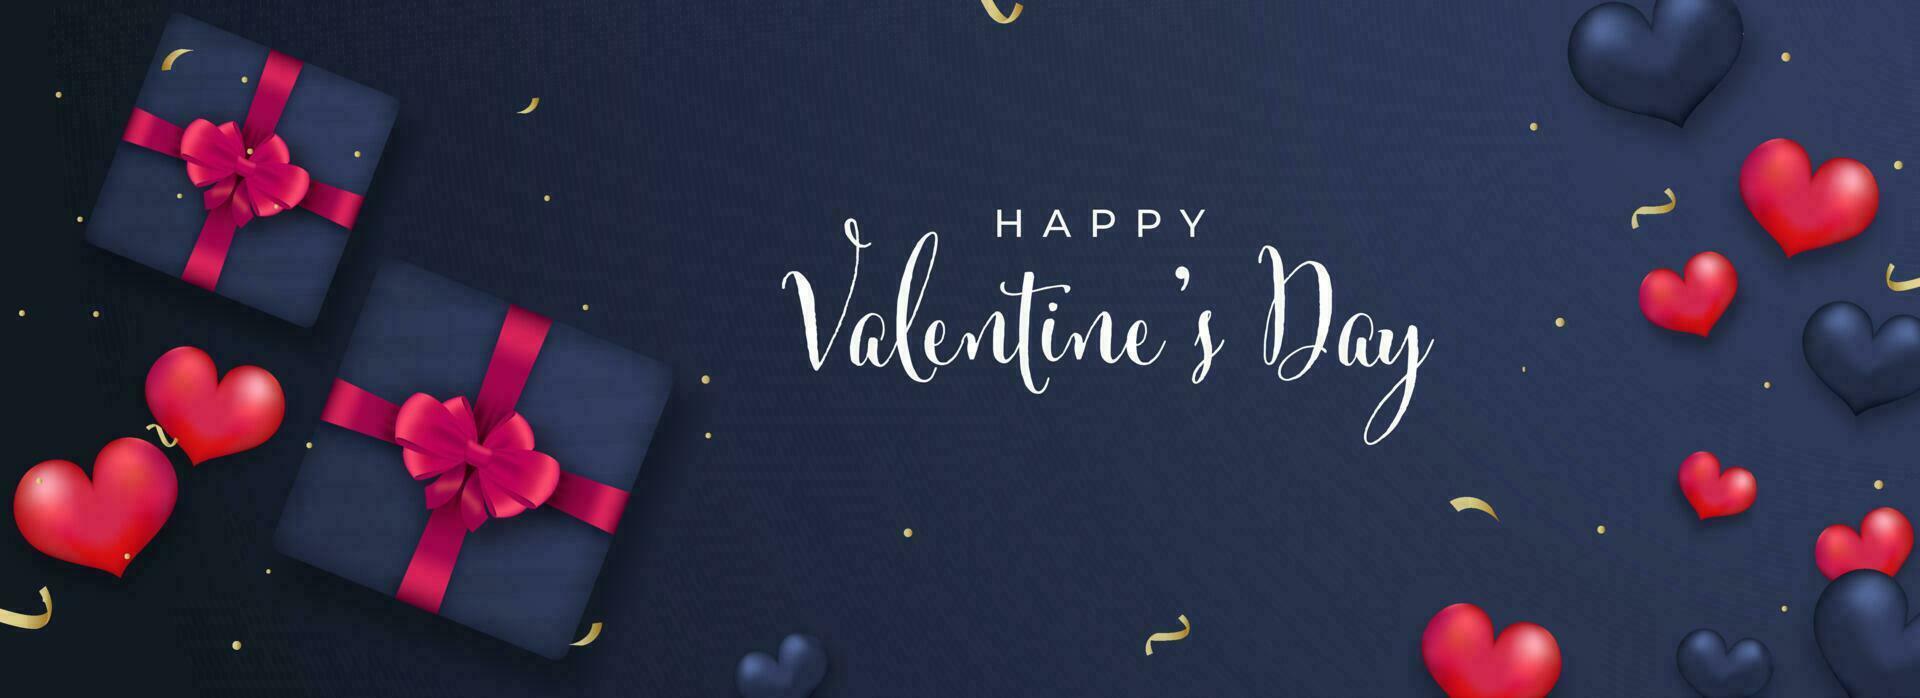 Happy Valentine's Day Font With Top View Of 3D Gift Boxes And Glossy Heart Balloons On Blue Background. vector